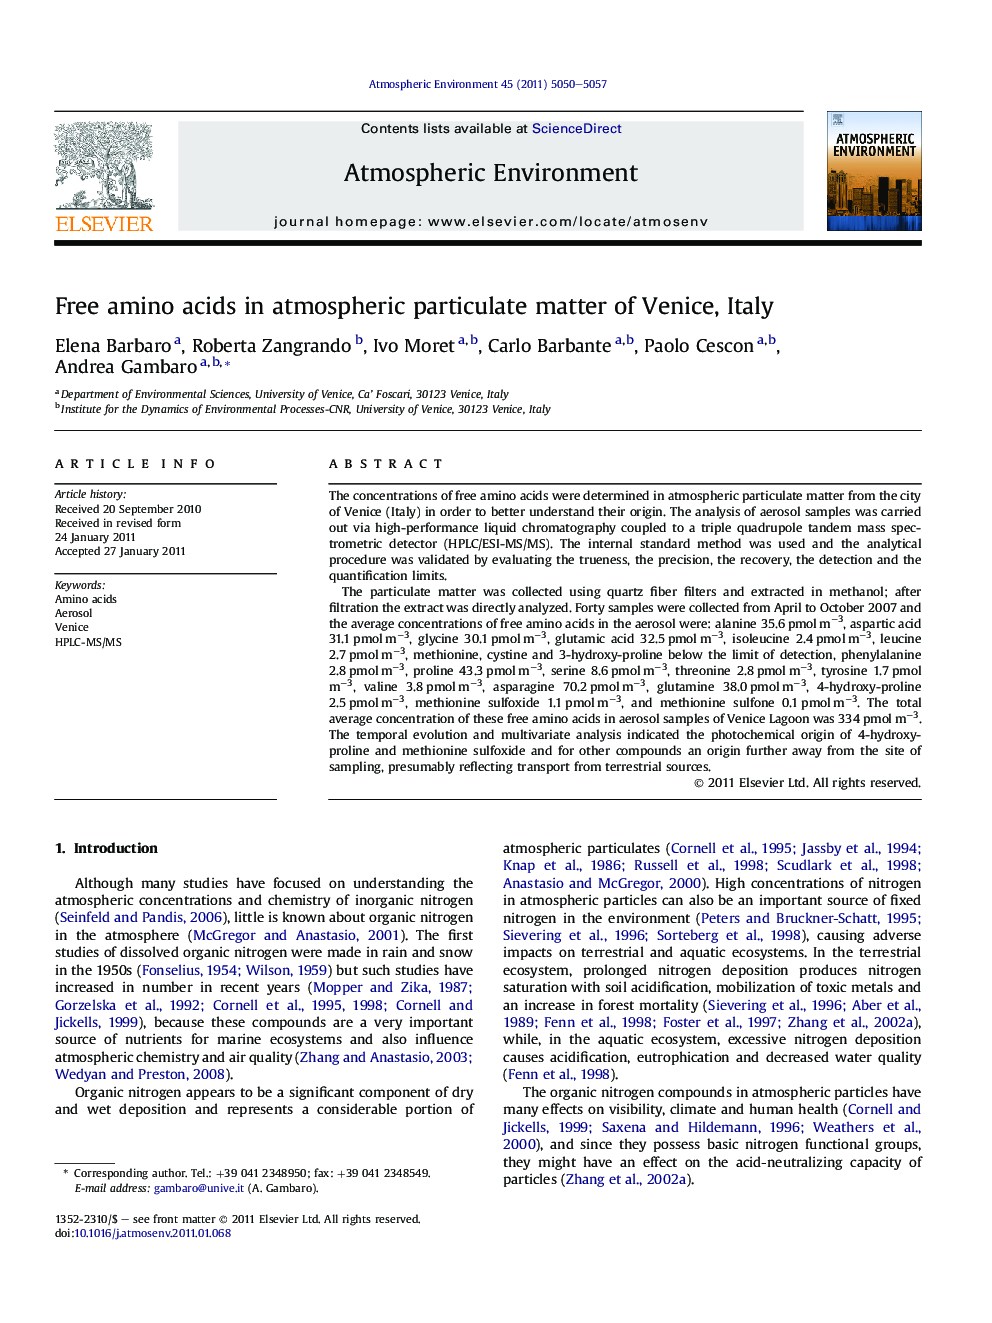 Free amino acids in atmospheric particulate matter of Venice, Italy